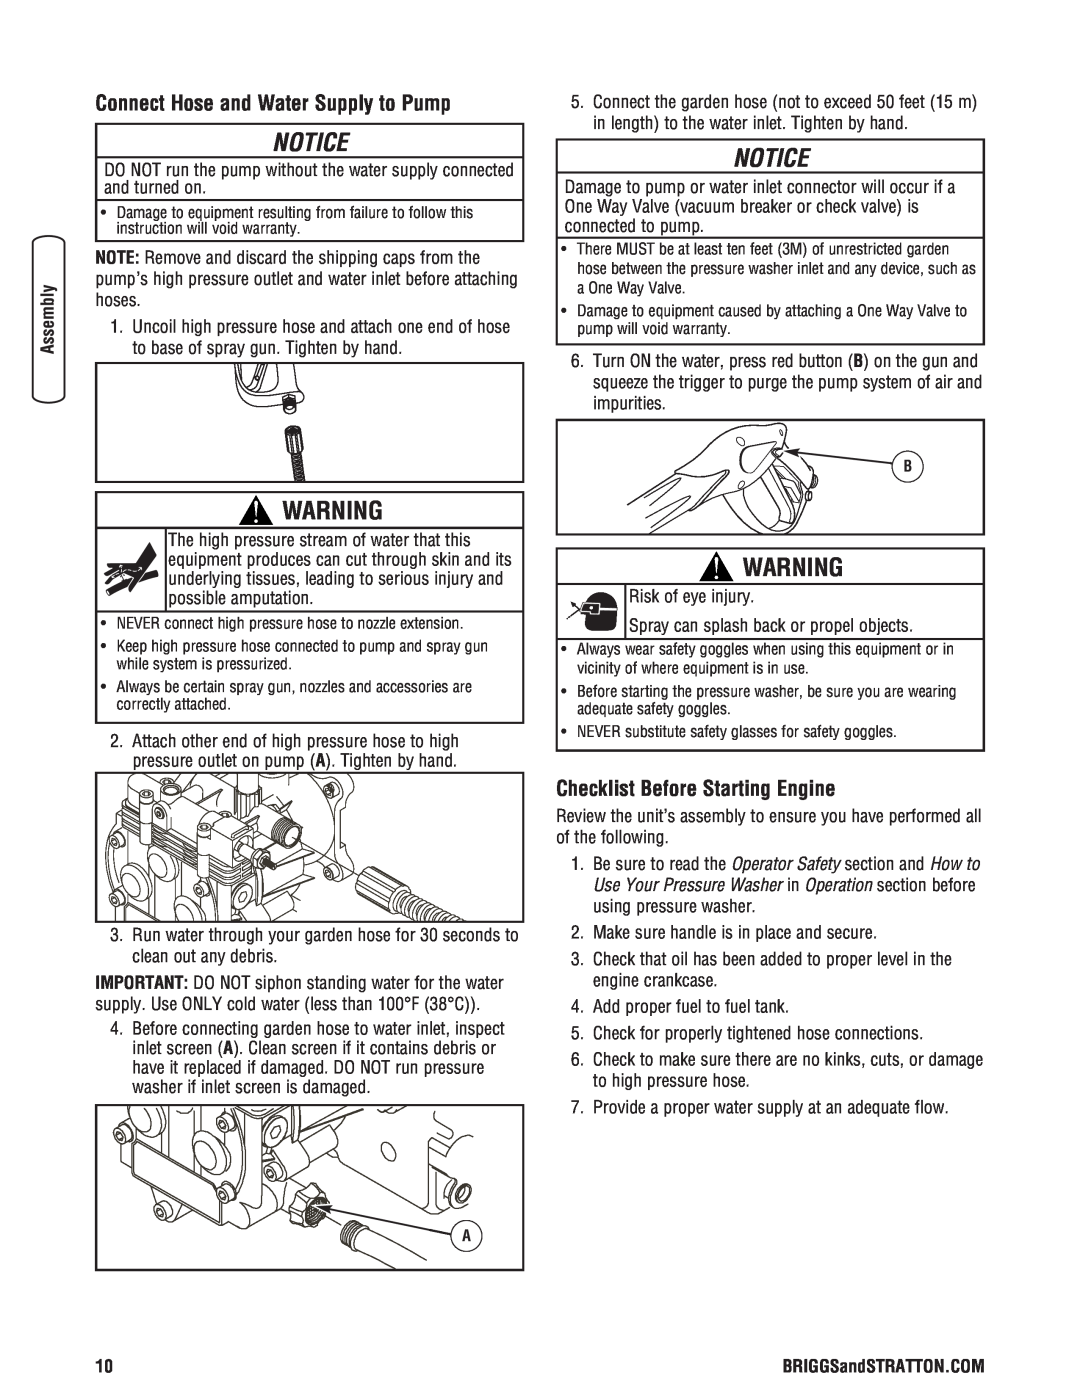 Briggs & Stratton 2900 PSI manual Notice, Connect Hose and Water Supply to Pump, Checklist Before Starting Engine 